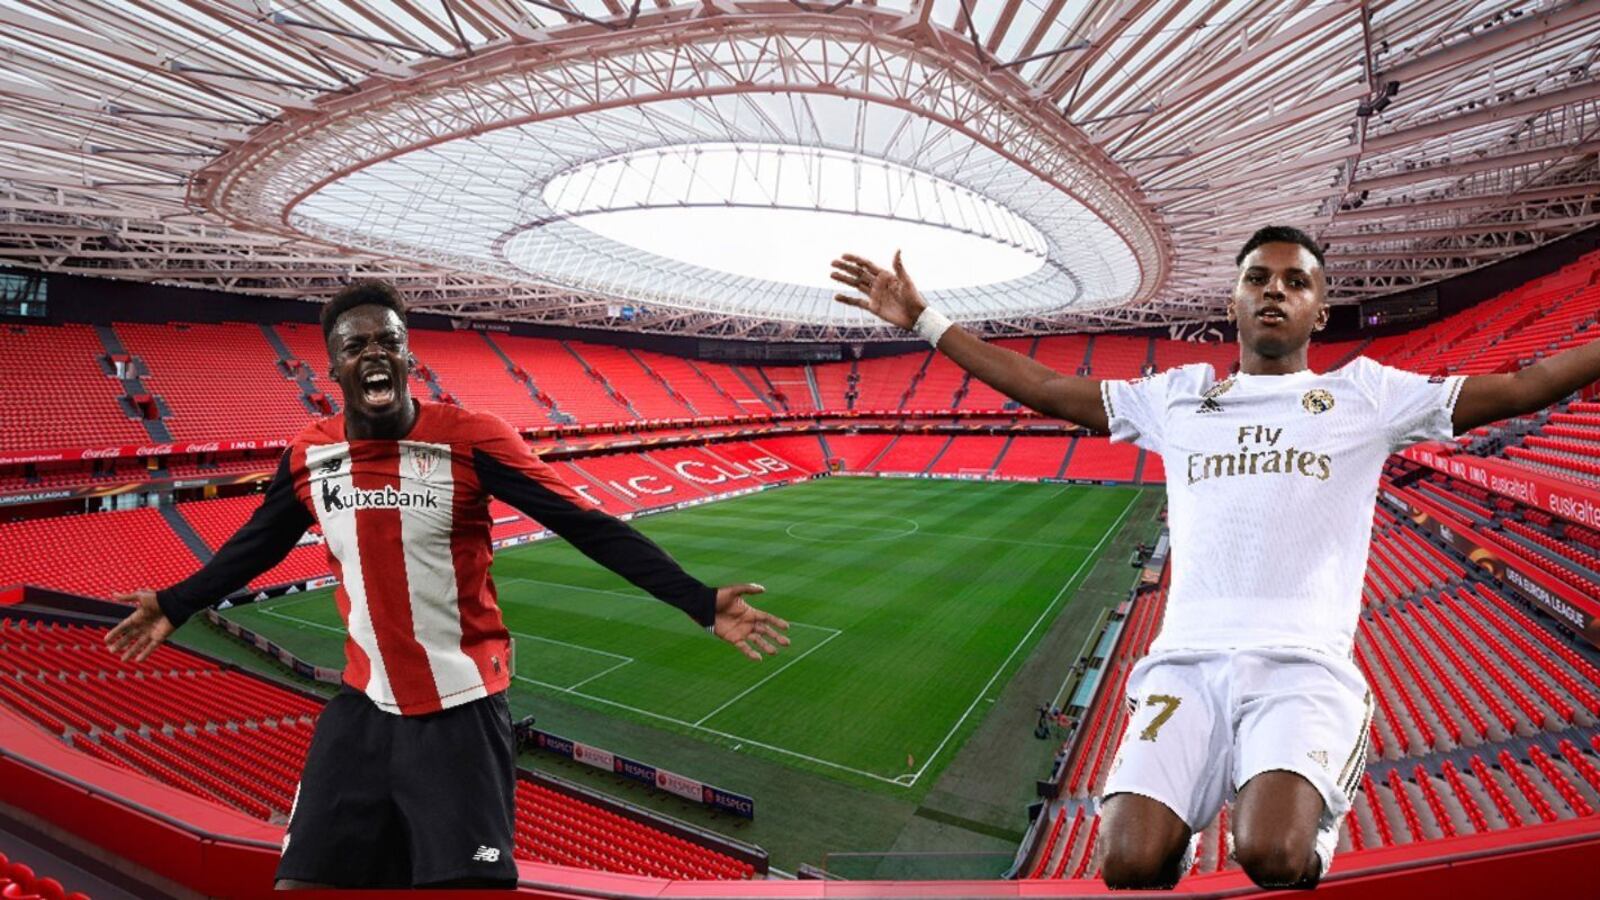 Where to watch Real Madrid vs Athletic Bilbao in the United States?